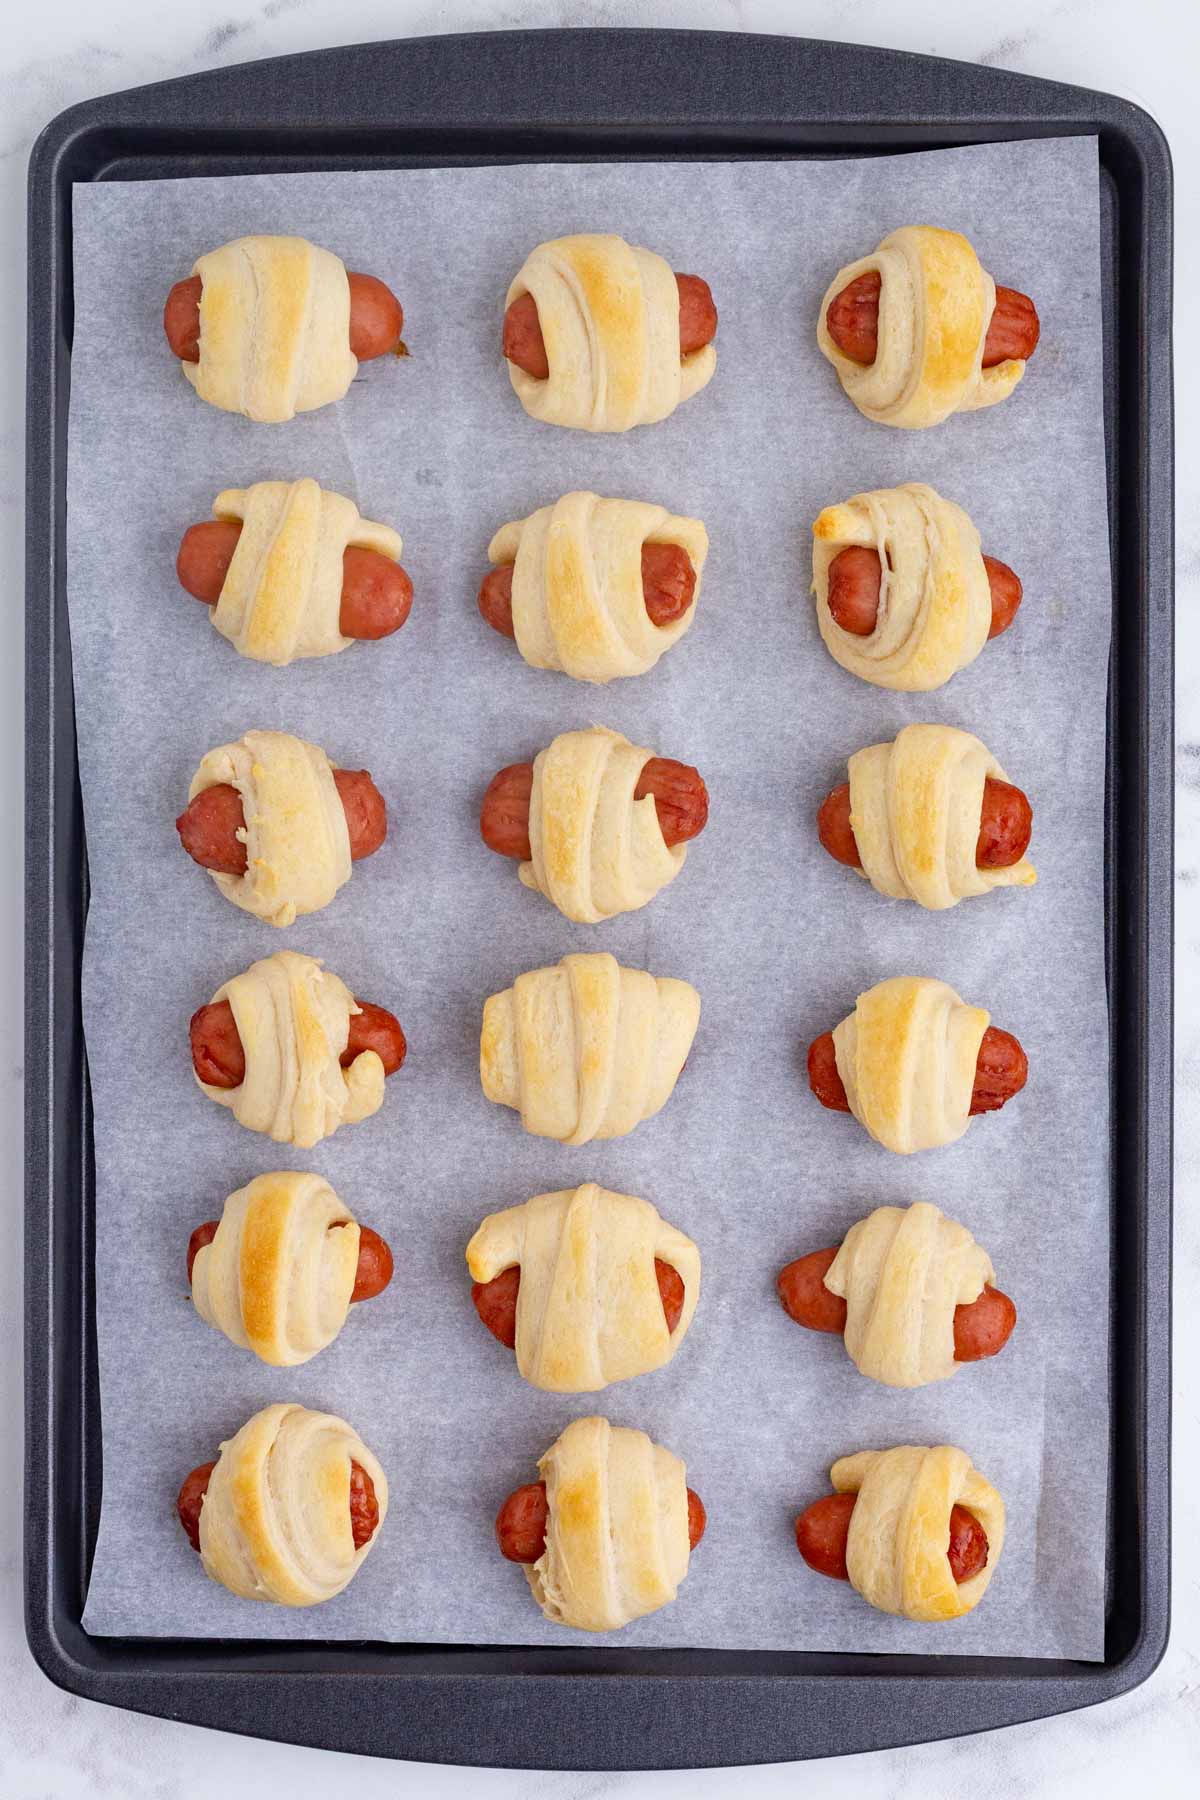 Pigs in a blanket are baked to golden perfection on a baking sheet.